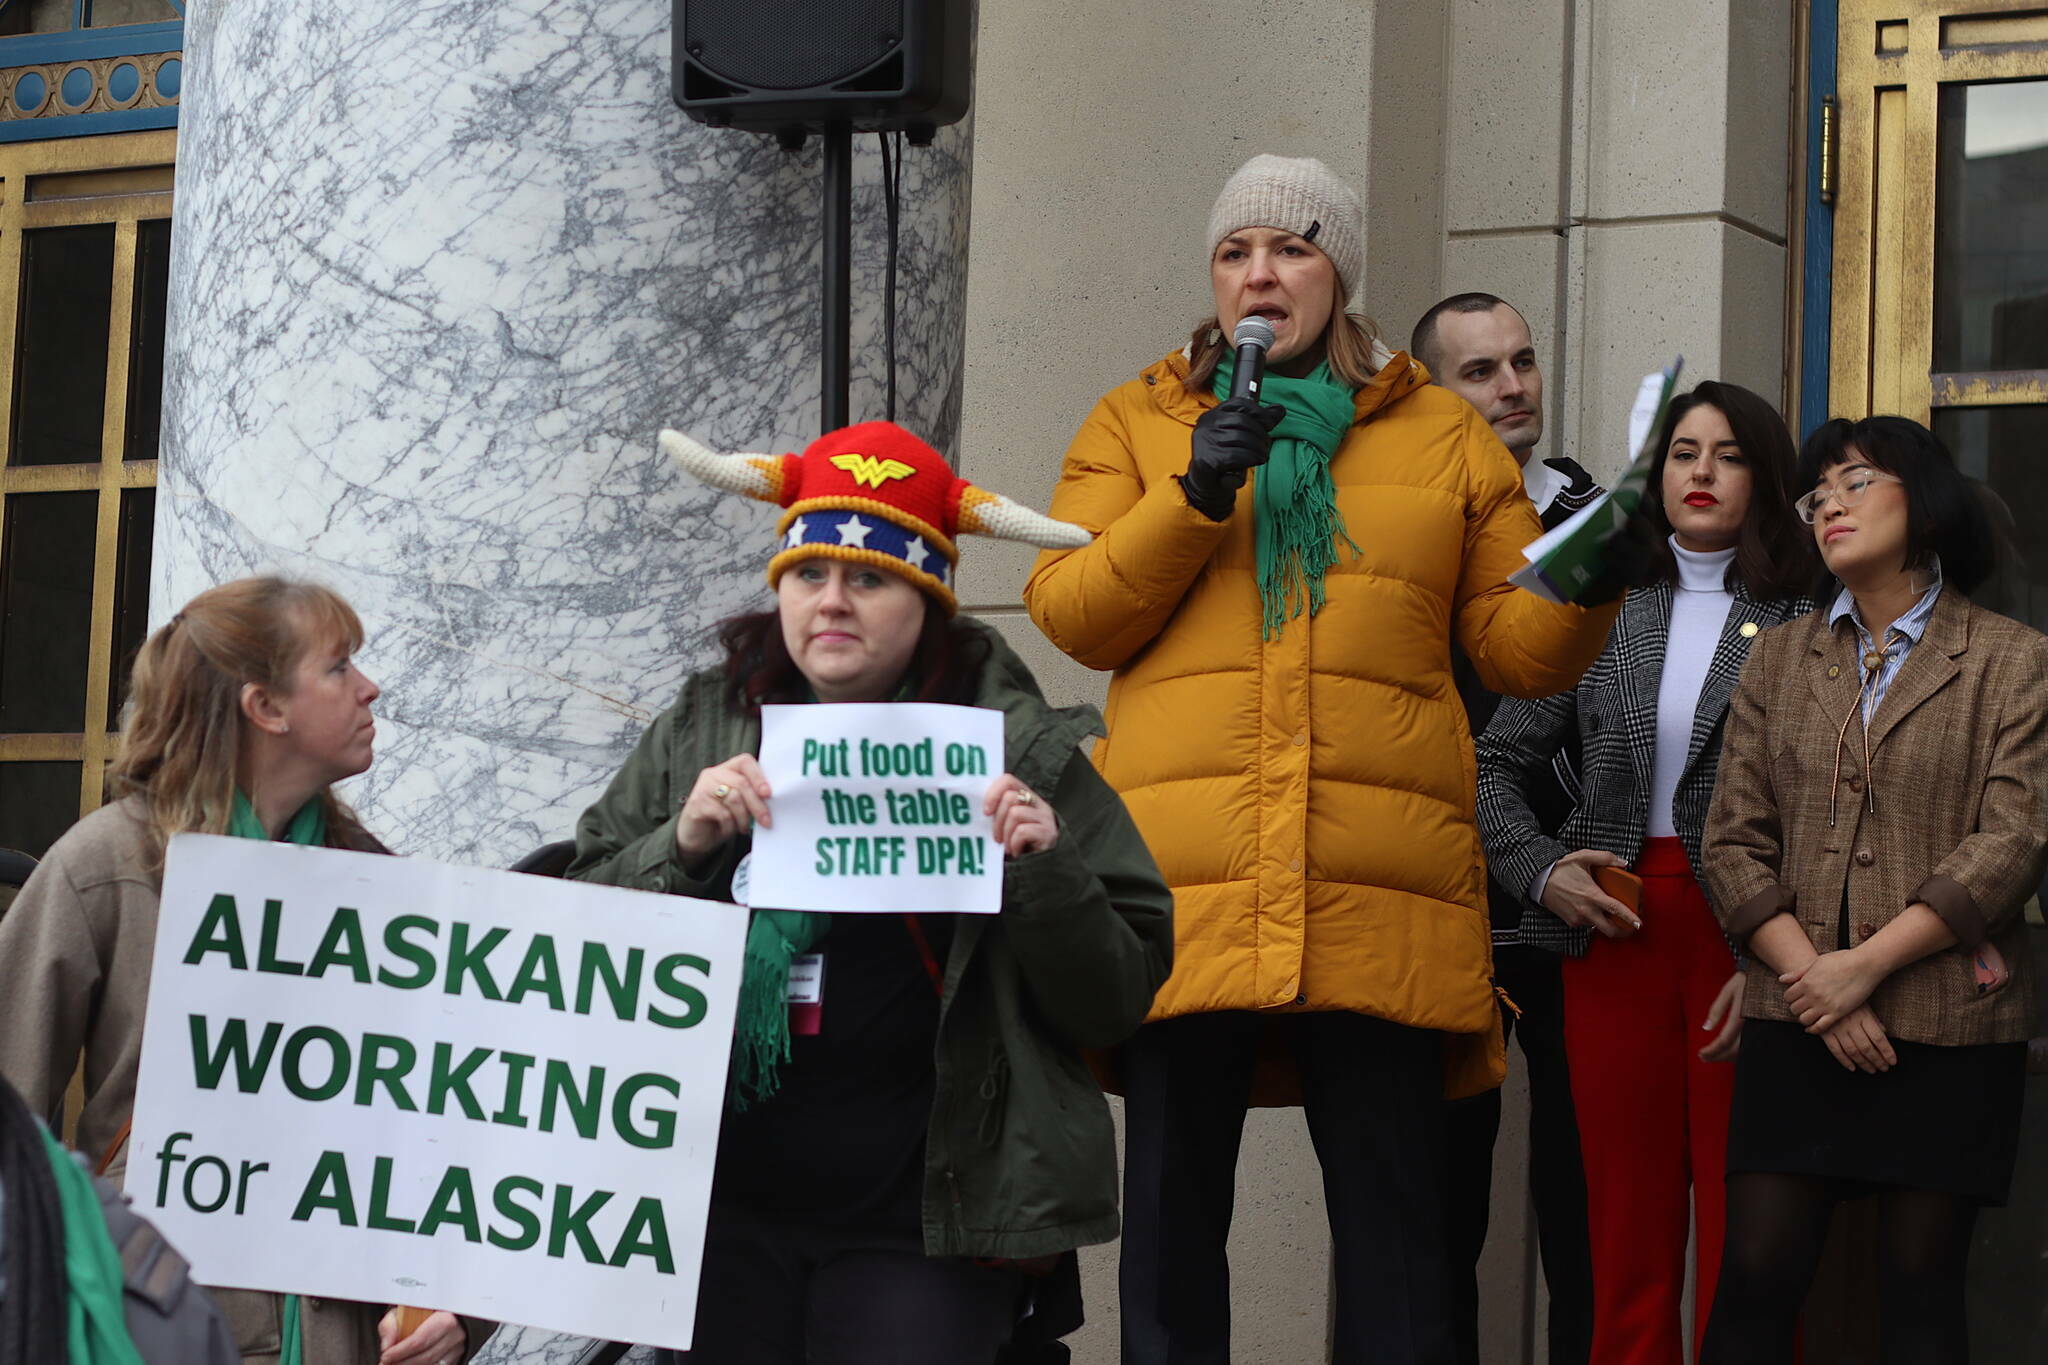 Heidi Drygas, executive director of the 8,000-member Alaska State Employees Association, addresses a rally outside the Alaska State Capitol on Feb. 10. The union prevailed in a lawsuit against Gov. Mike Dunleavy’s administration alleging union dues rules were illegally changed, but the state on Wednesday appealed the ruling to the U.S. Supreme Court. (Mark Sabbatini / Juneau Empire File)